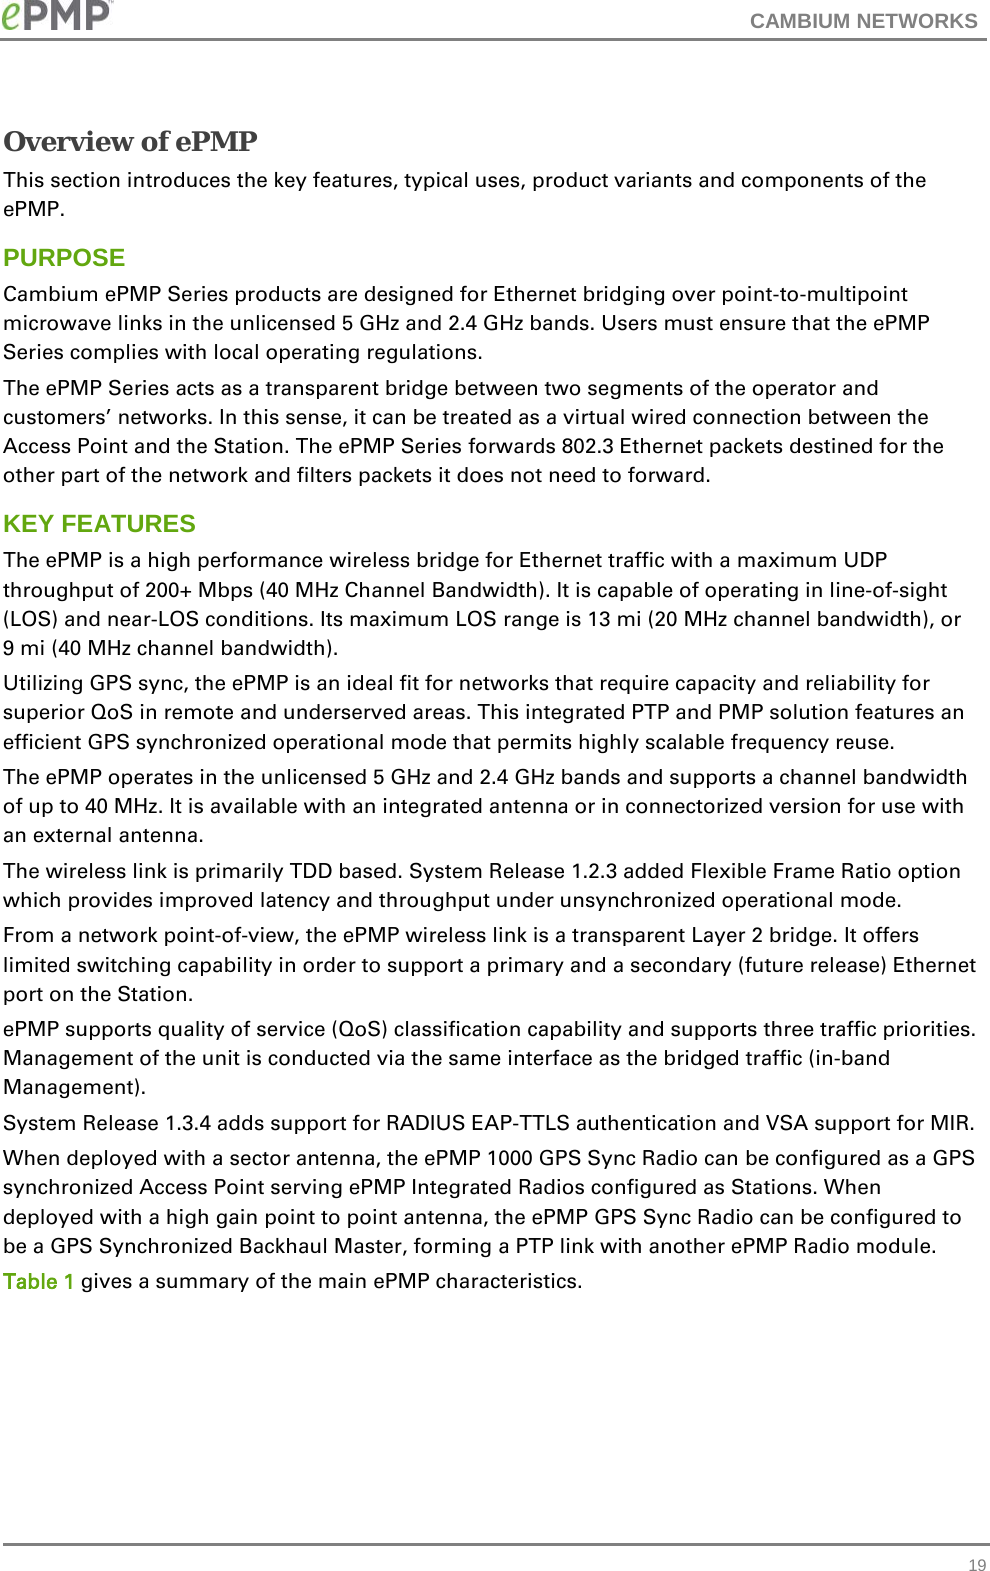 CAMBIUM NETWORKS  Overview of ePMP This section introduces the key features, typical uses, product variants and components of the ePMP. PURPOSE Cambium ePMP Series products are designed for Ethernet bridging over point-to-multipoint microwave links in the unlicensed 5 GHz and 2.4 GHz bands. Users must ensure that the ePMP Series complies with local operating regulations. The ePMP Series acts as a transparent bridge between two segments of the operator and customers’ networks. In this sense, it can be treated as a virtual wired connection between the Access Point and the Station. The ePMP Series forwards 802.3 Ethernet packets destined for the other part of the network and filters packets it does not need to forward.  KEY FEATURES The ePMP is a high performance wireless bridge for Ethernet traffic with a maximum UDP throughput of 200+ Mbps (40 MHz Channel Bandwidth). It is capable of operating in line-of-sight (LOS) and near-LOS conditions. Its maximum LOS range is 13 mi (20 MHz channel bandwidth), or 9 mi (40 MHz channel bandwidth). Utilizing GPS sync, the ePMP is an ideal fit for networks that require capacity and reliability for superior QoS in remote and underserved areas. This integrated PTP and PMP solution features an efficient GPS synchronized operational mode that permits highly scalable frequency reuse. The ePMP operates in the unlicensed 5 GHz and 2.4 GHz bands and supports a channel bandwidth of up to 40 MHz. It is available with an integrated antenna or in connectorized version for use with an external antenna. The wireless link is primarily TDD based. System Release 1.2.3 added Flexible Frame Ratio option which provides improved latency and throughput under unsynchronized operational mode.  From a network point-of-view, the ePMP wireless link is a transparent Layer 2 bridge. It offers limited switching capability in order to support a primary and a secondary (future release) Ethernet port on the Station. ePMP supports quality of service (QoS) classification capability and supports three traffic priorities. Management of the unit is conducted via the same interface as the bridged traffic (in-band Management). System Release 1.3.4 adds support for RADIUS EAP-TTLS authentication and VSA support for MIR.  When deployed with a sector antenna, the ePMP 1000 GPS Sync Radio can be configured as a GPS synchronized Access Point serving ePMP Integrated Radios configured as Stations. When deployed with a high gain point to point antenna, the ePMP GPS Sync Radio can be configured to be a GPS Synchronized Backhaul Master, forming a PTP link with another ePMP Radio module. Table 1 gives a summary of the main ePMP characteristics.  19 